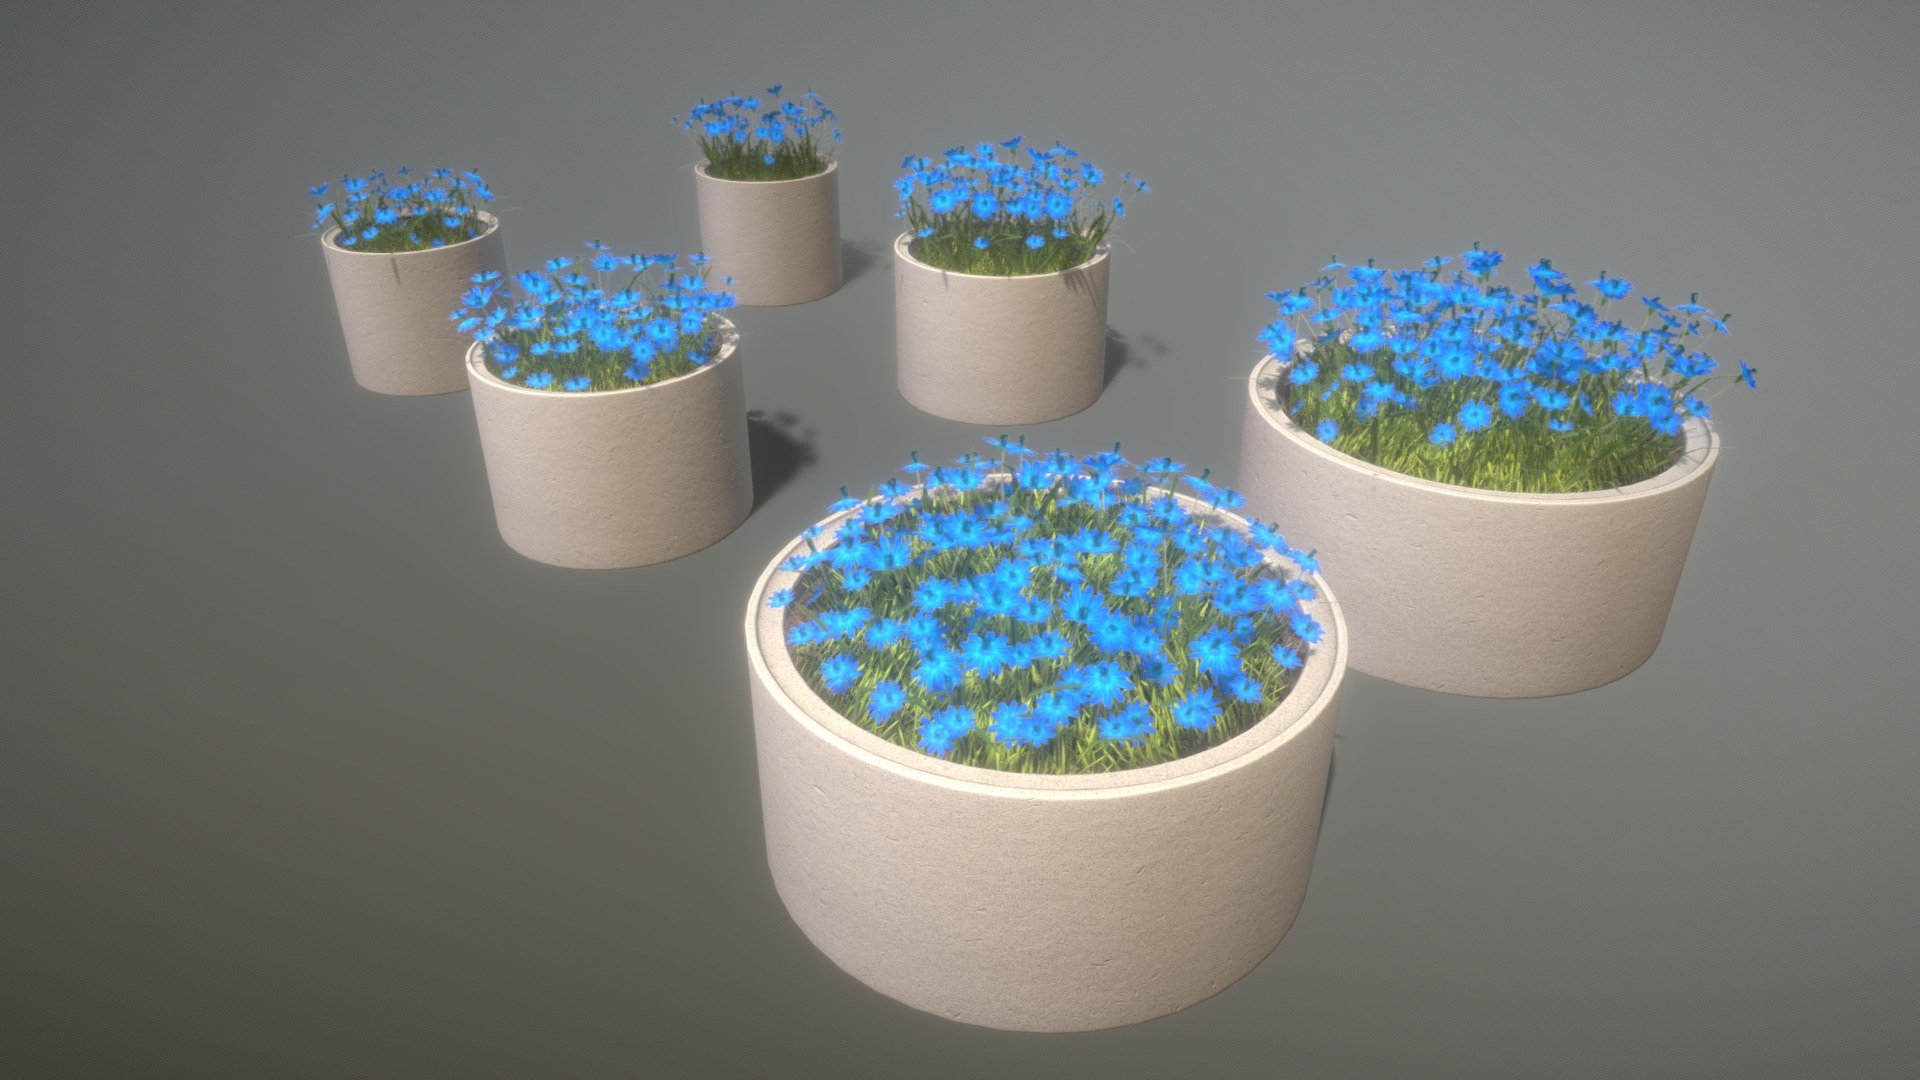 Concrete Pipe Pots With Blue Flowers